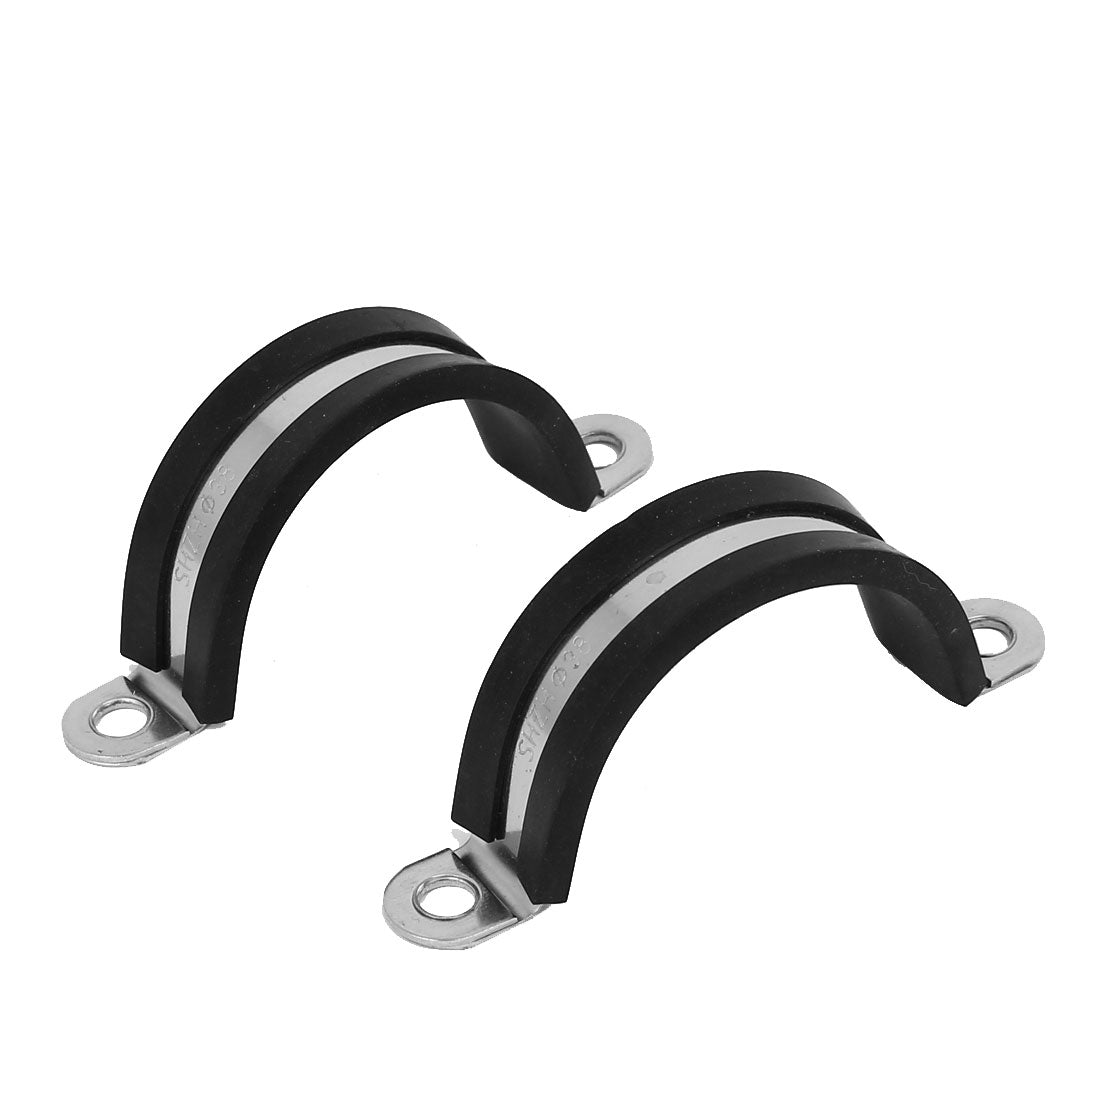 uxcell Uxcell 38mm U Clips EPDM Rubber Lined Mounting Brackets 5pcs for Pipe Tube Cable